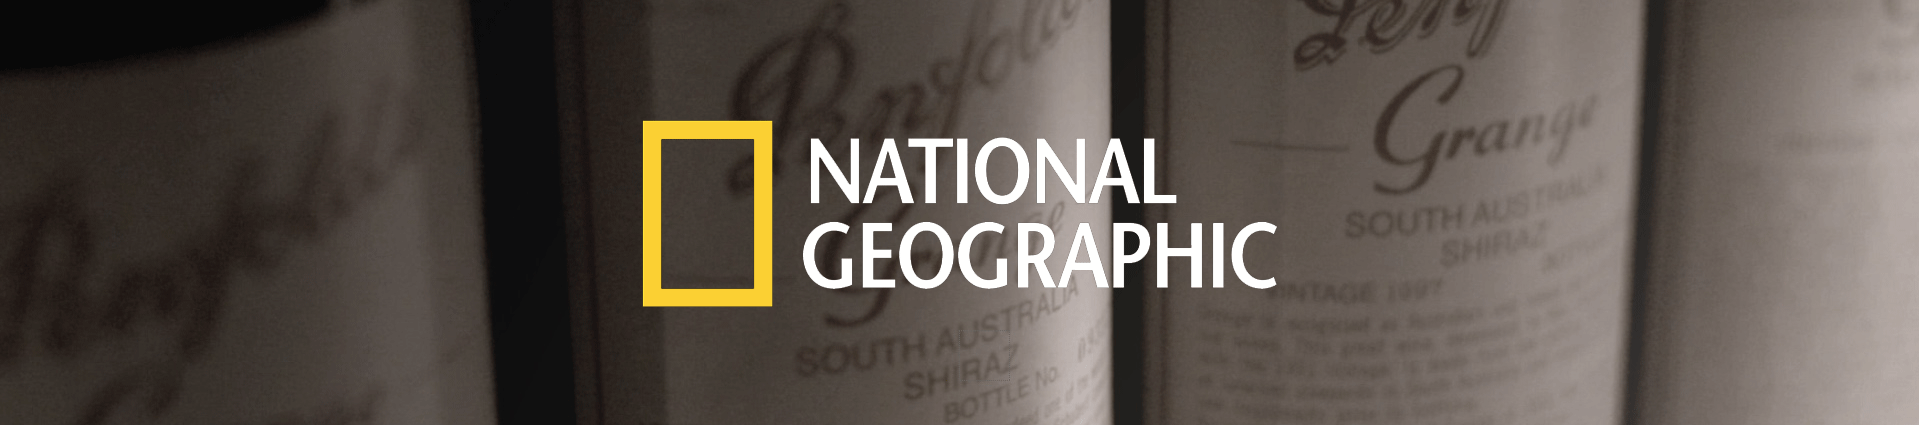 Three Grange labels close up. National Geographic logo is overlaid